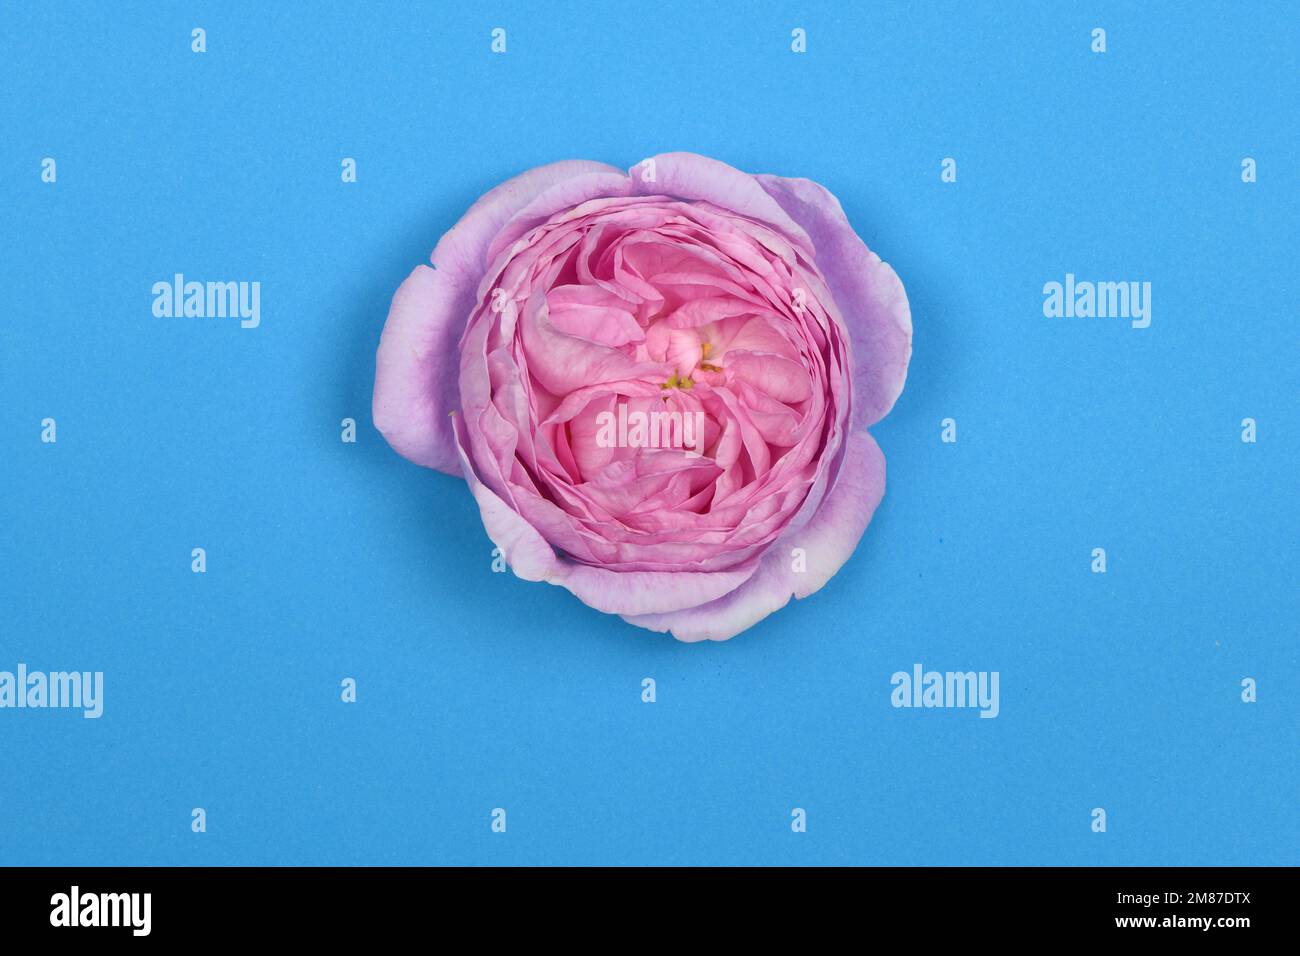 Pion isolated on blue background. Pink gentle soft peony flower. Stylish flowers for St. Valentine's Day and March 8. High resolution photo. Full dept Stock Photo